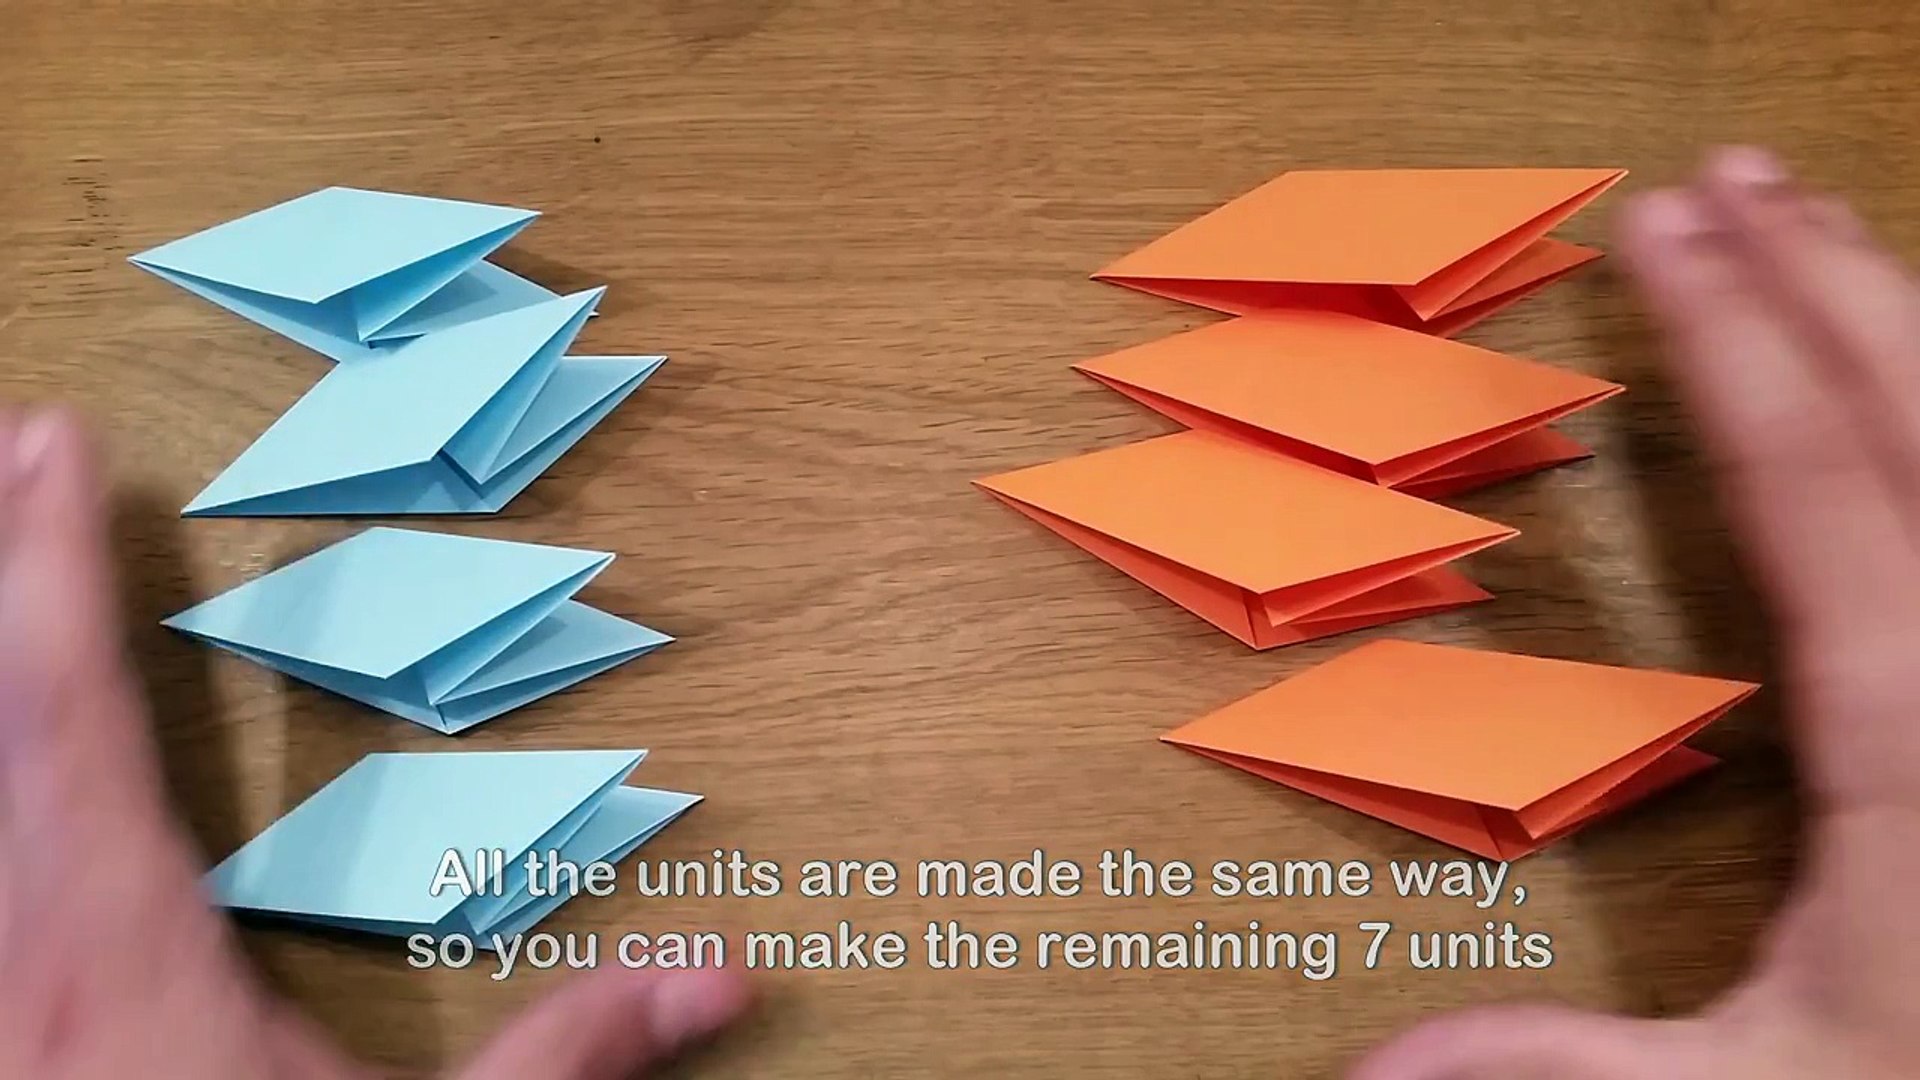 How To Make a Paper Transforming Ninja Star - Origami - video Dailymotion